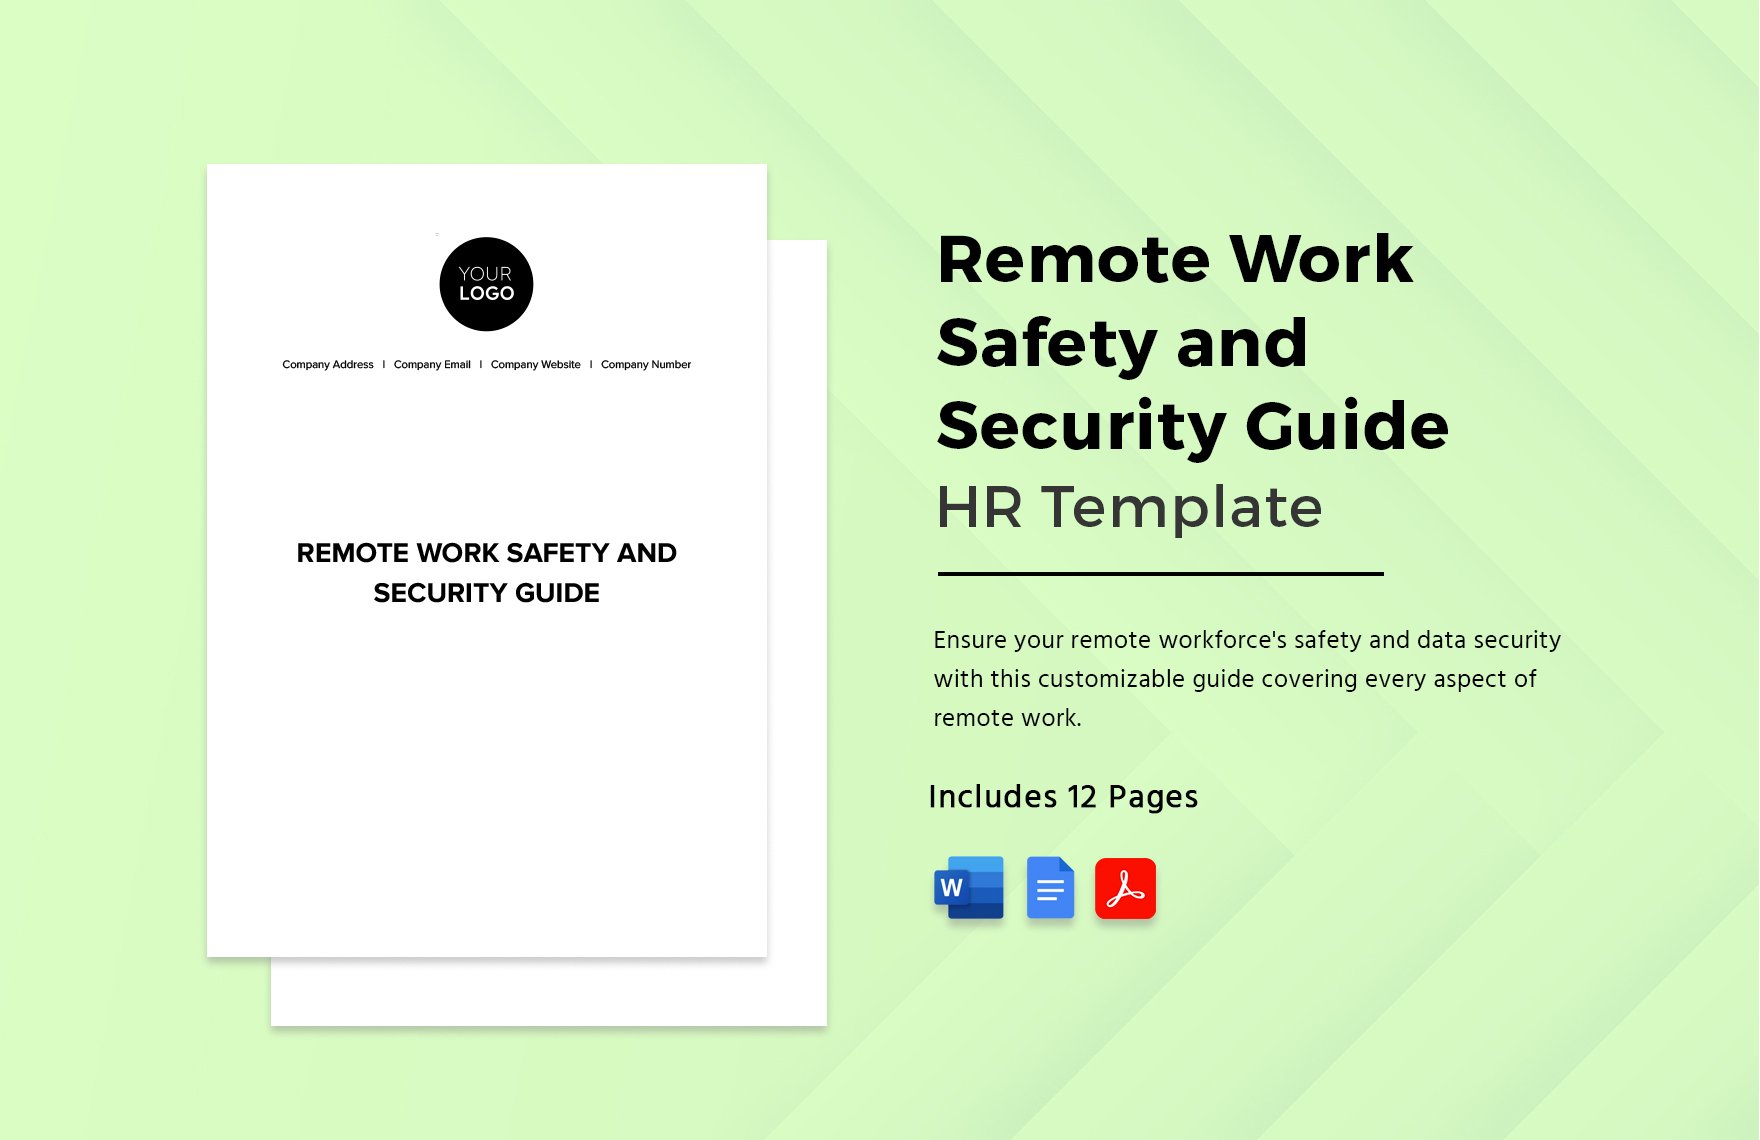 Remote Work Safety and Security Guide HR Template in Word, Google Docs, PDF